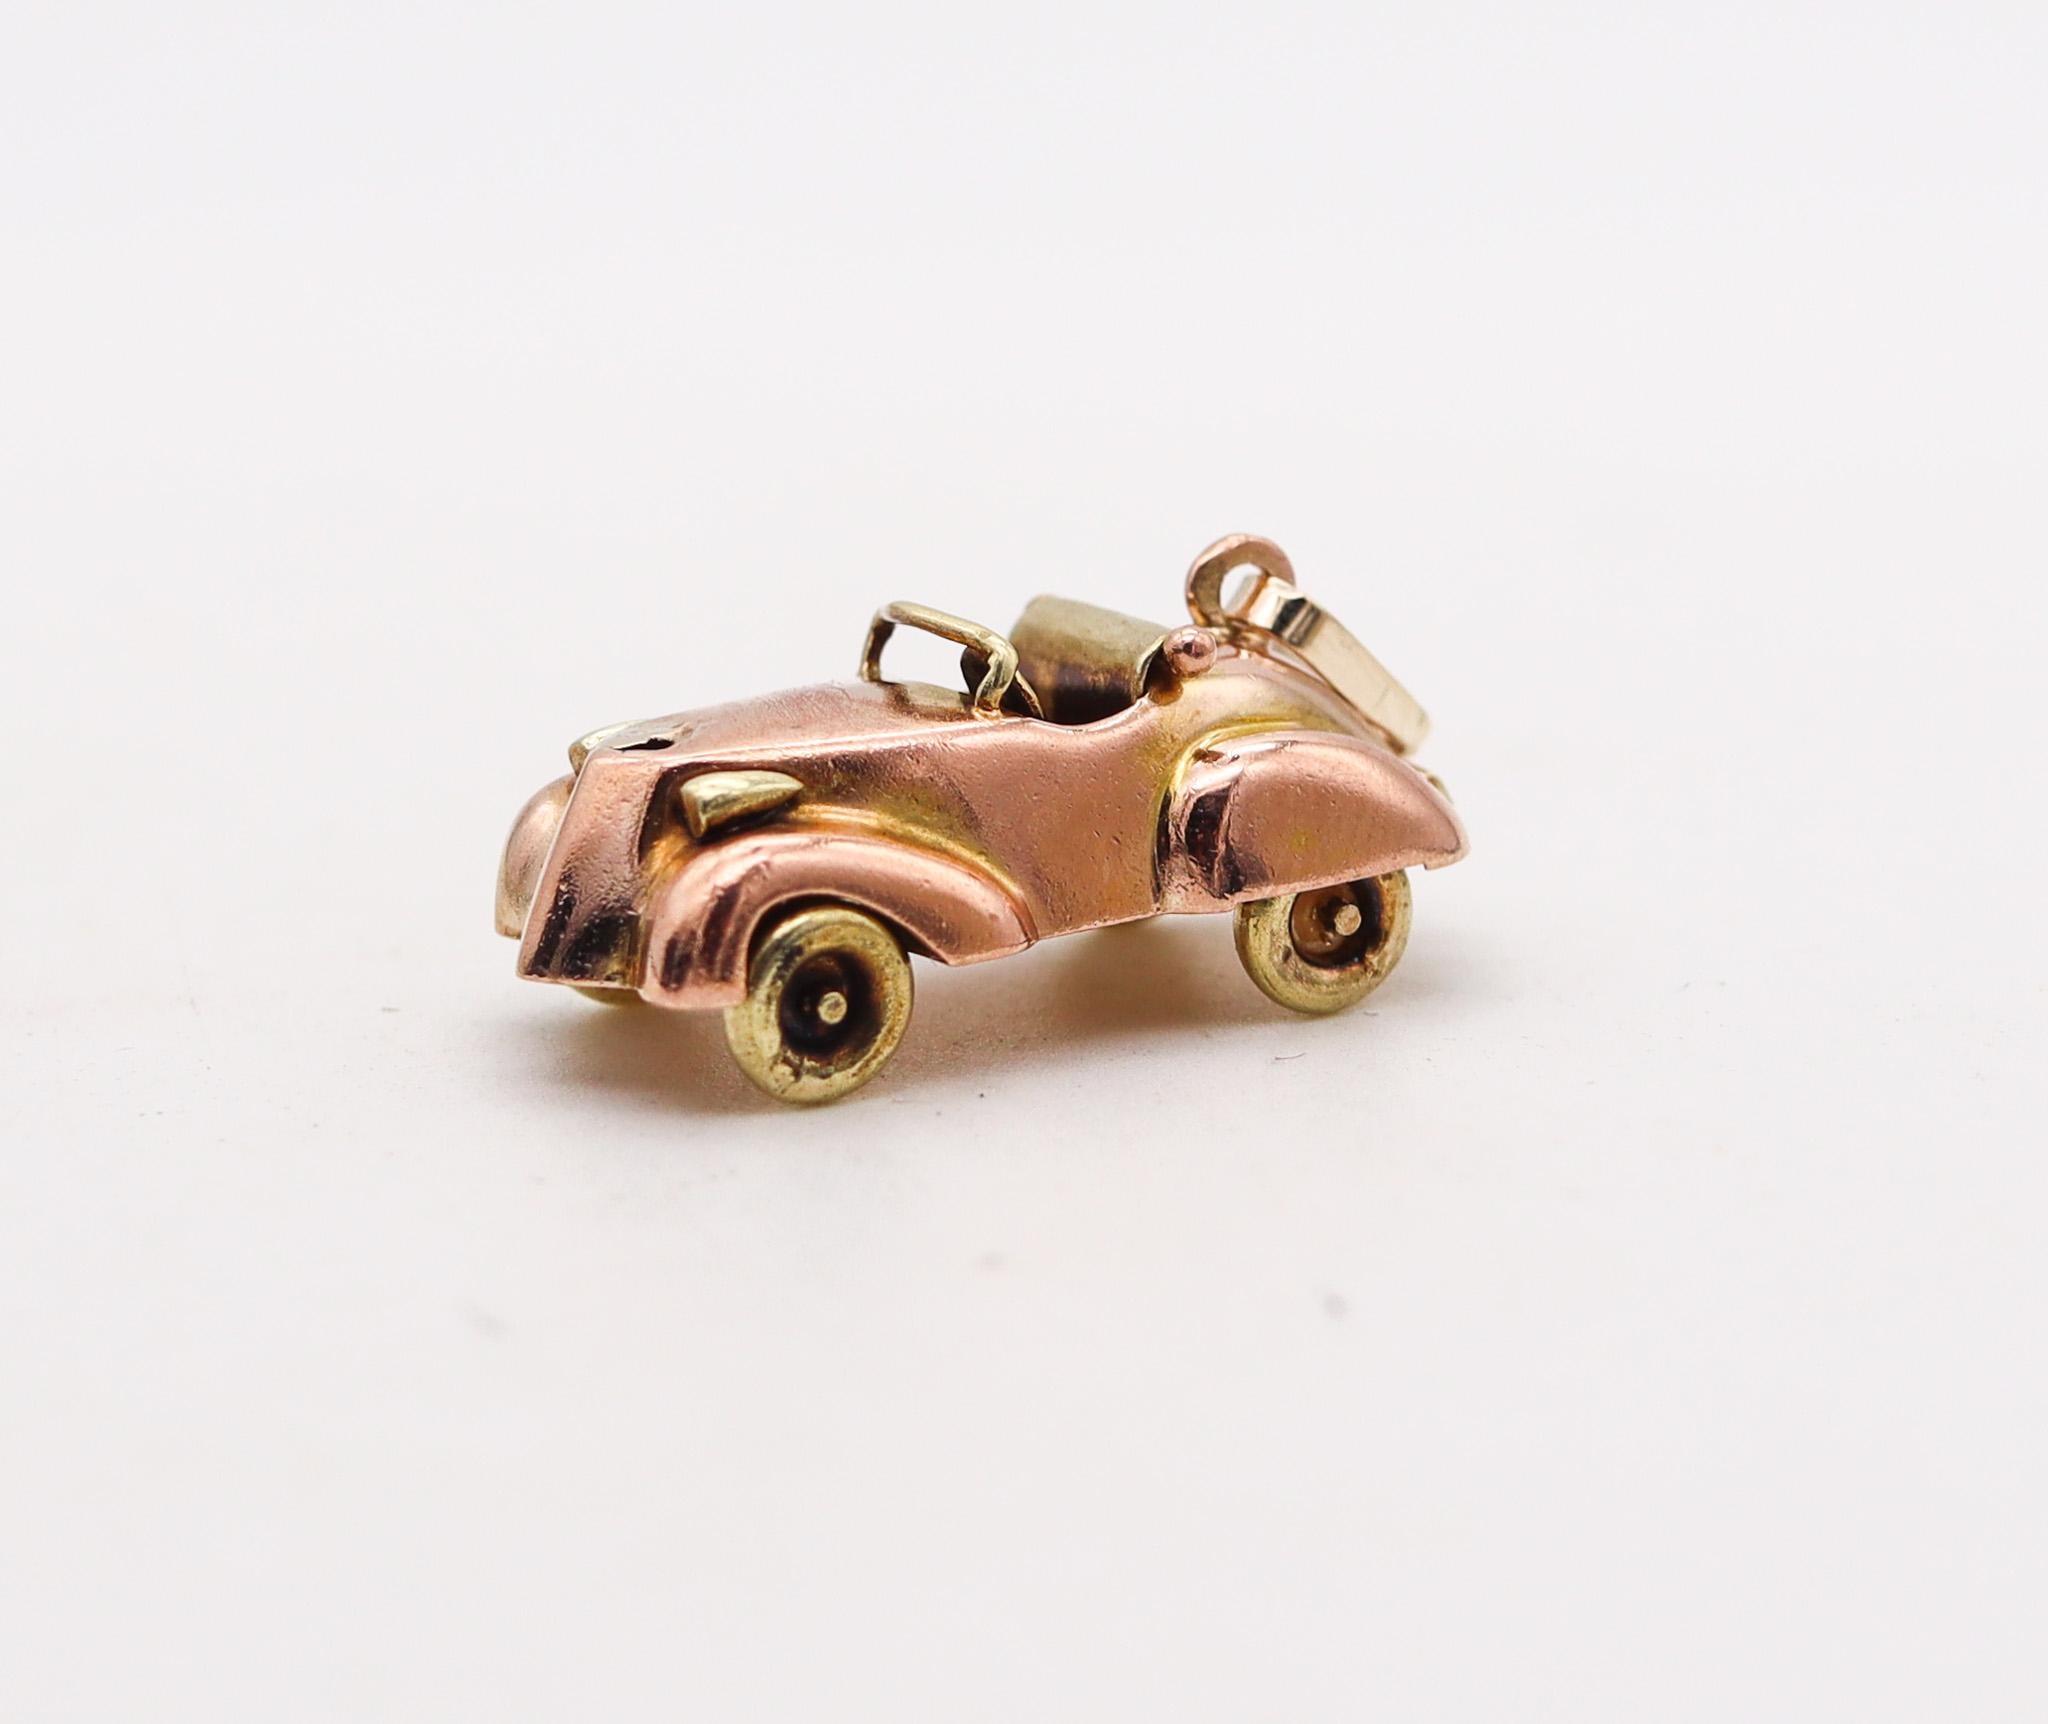 An antique racing car pendant-charm.

Beautiful and very well detailed pendant-charm made in the shape of a racing car. The charm was created during the art deco period back in the 1930's with very nice movable details, such the four wheels. It was